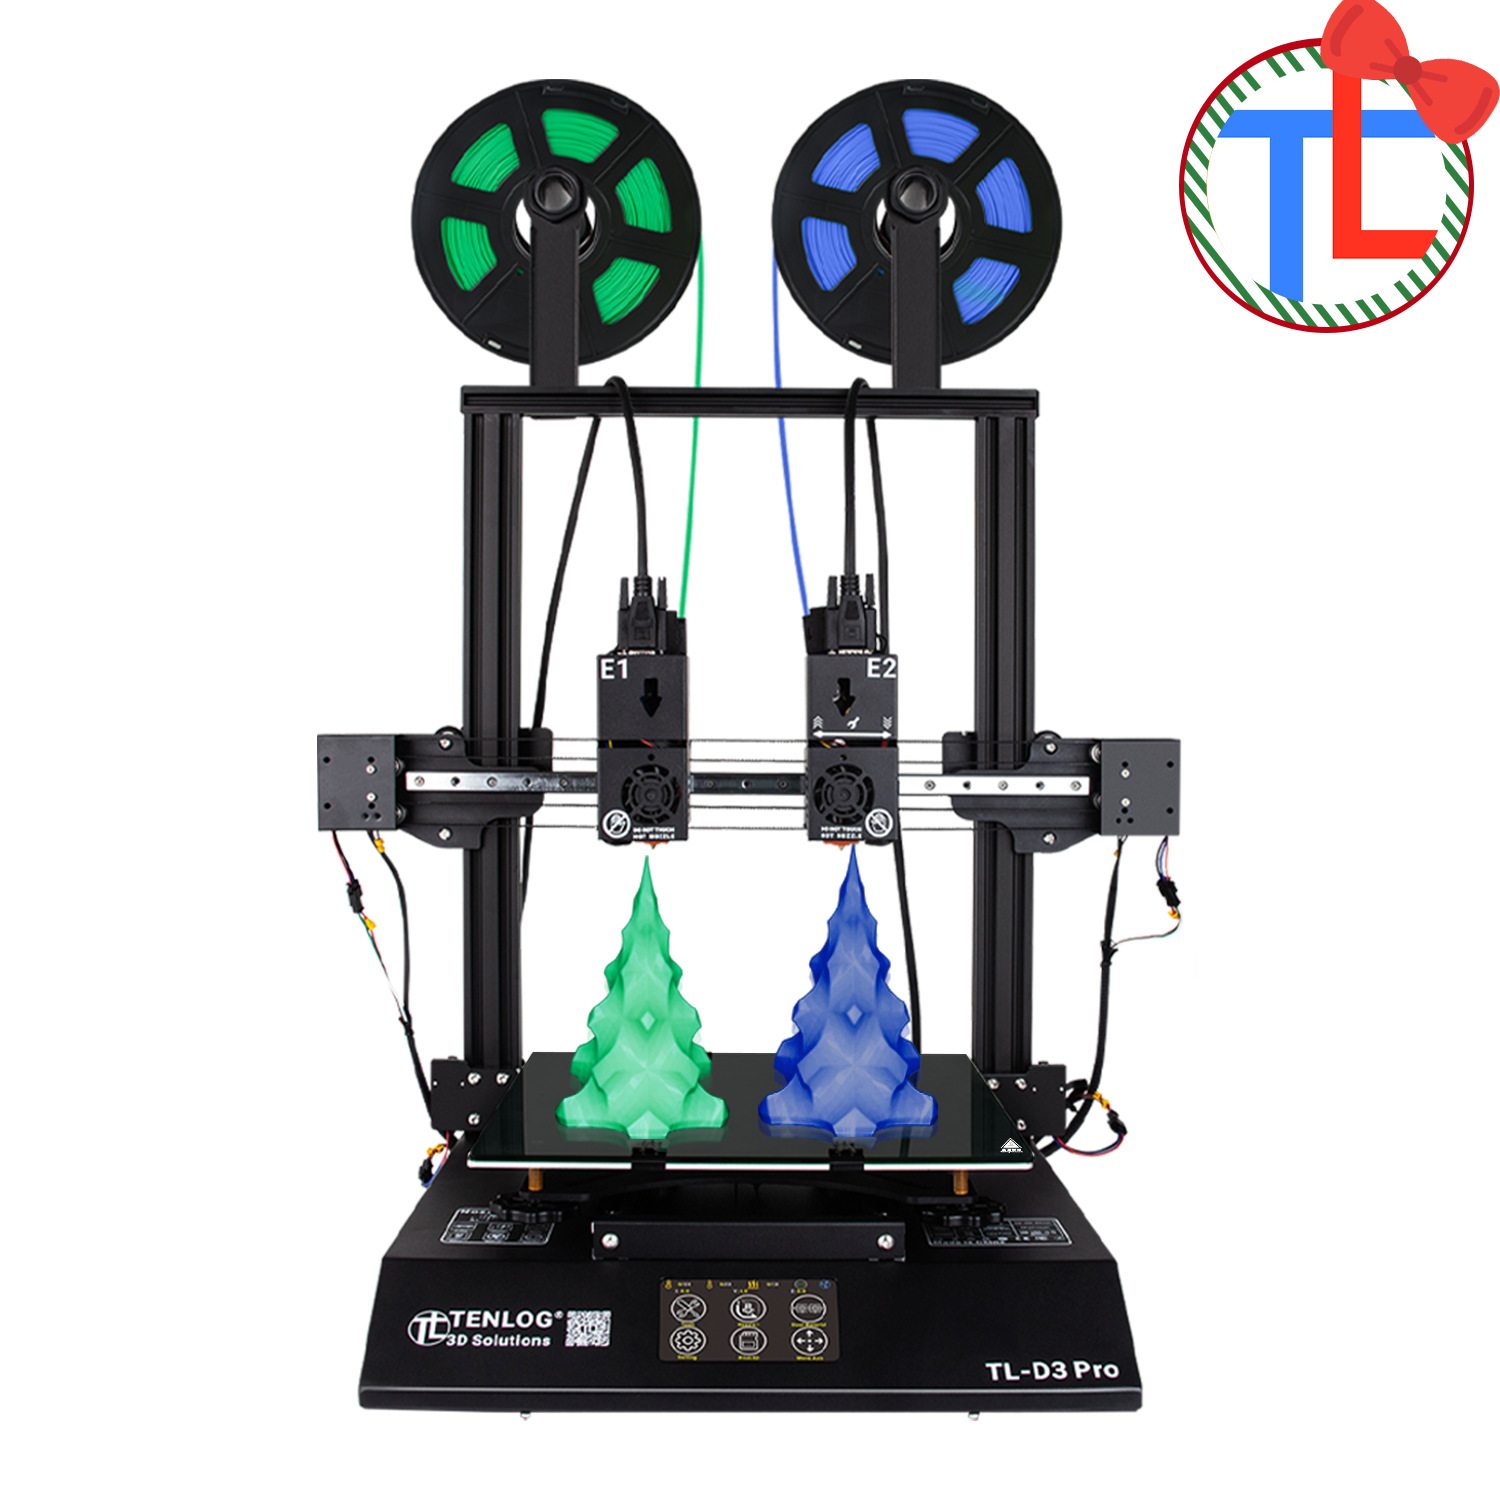 Merry Christmas, TL-D3 Pro USD $120 OFF, Get IDEX 3D Printer Now  (This Promotion Has Ended)